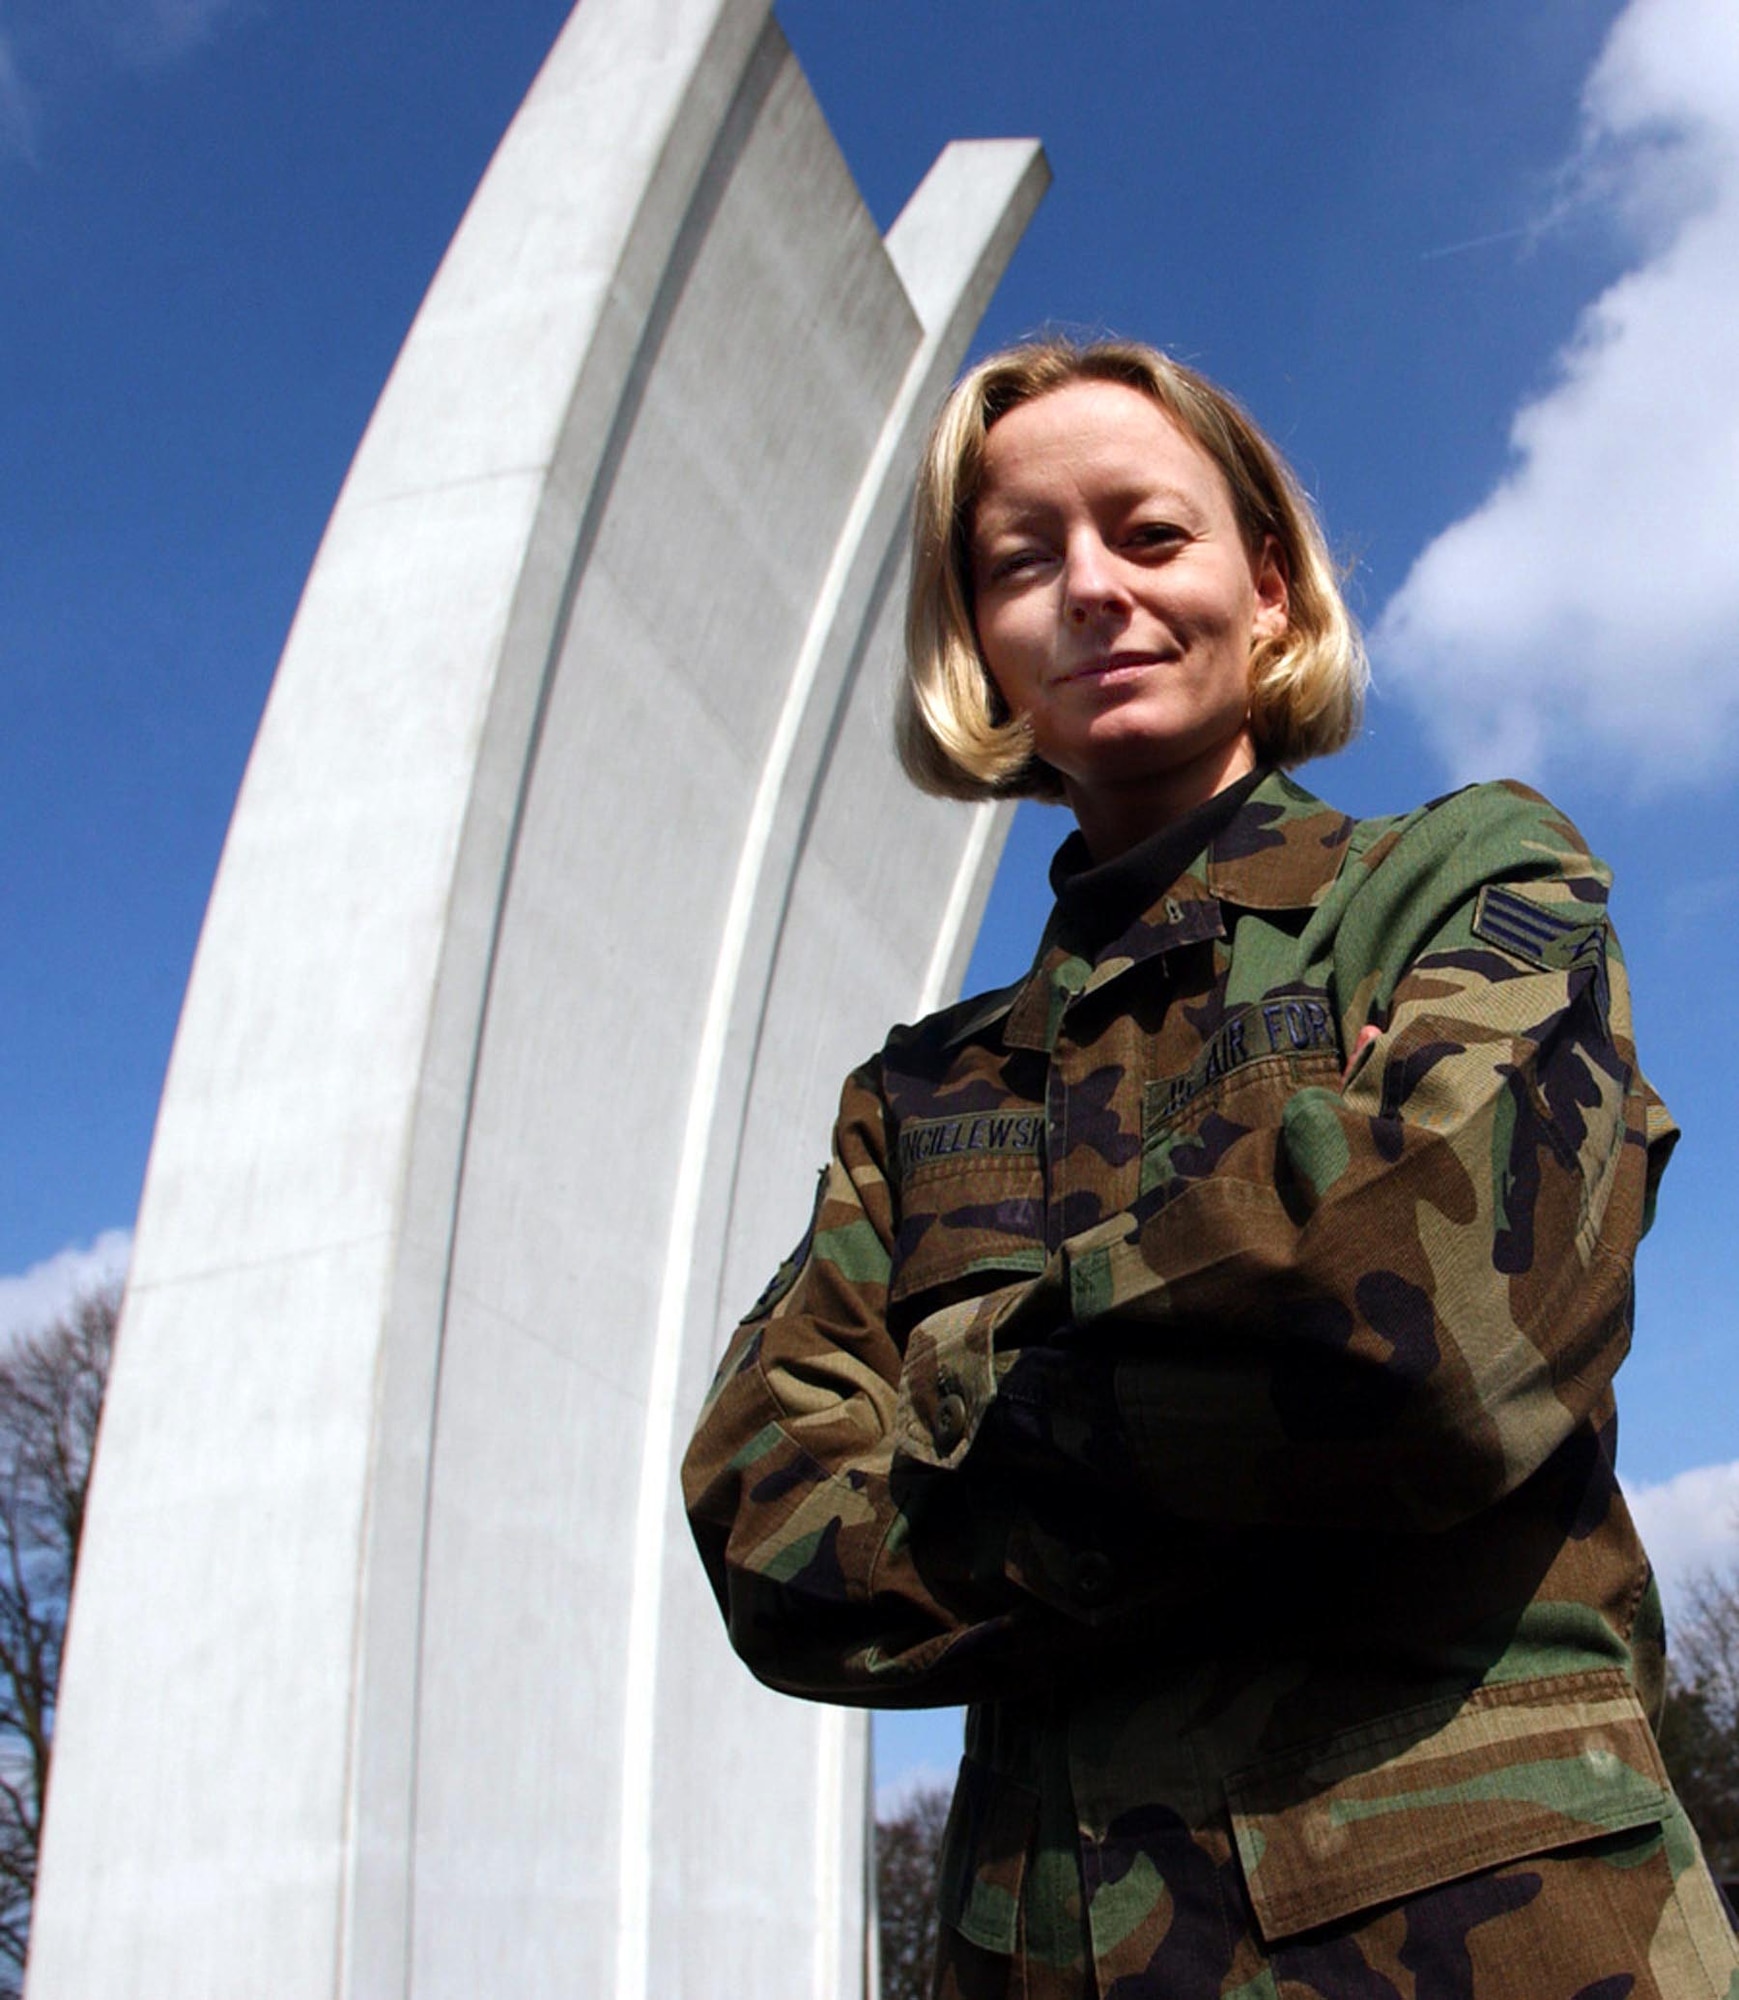 RHEIN-MAIN AIR BASE, Germany -- Senior Airman Anke Dzincielewski pauses near the Berlin Airlift Memorial here. Dzincielewski grew up in East Germany and remembers life before the Berlin Wall came down. She is deployed here from Ellsworth Air Force Base, S.D.  (U.S. Air Force photo by Master Sgt. Keith Reed)